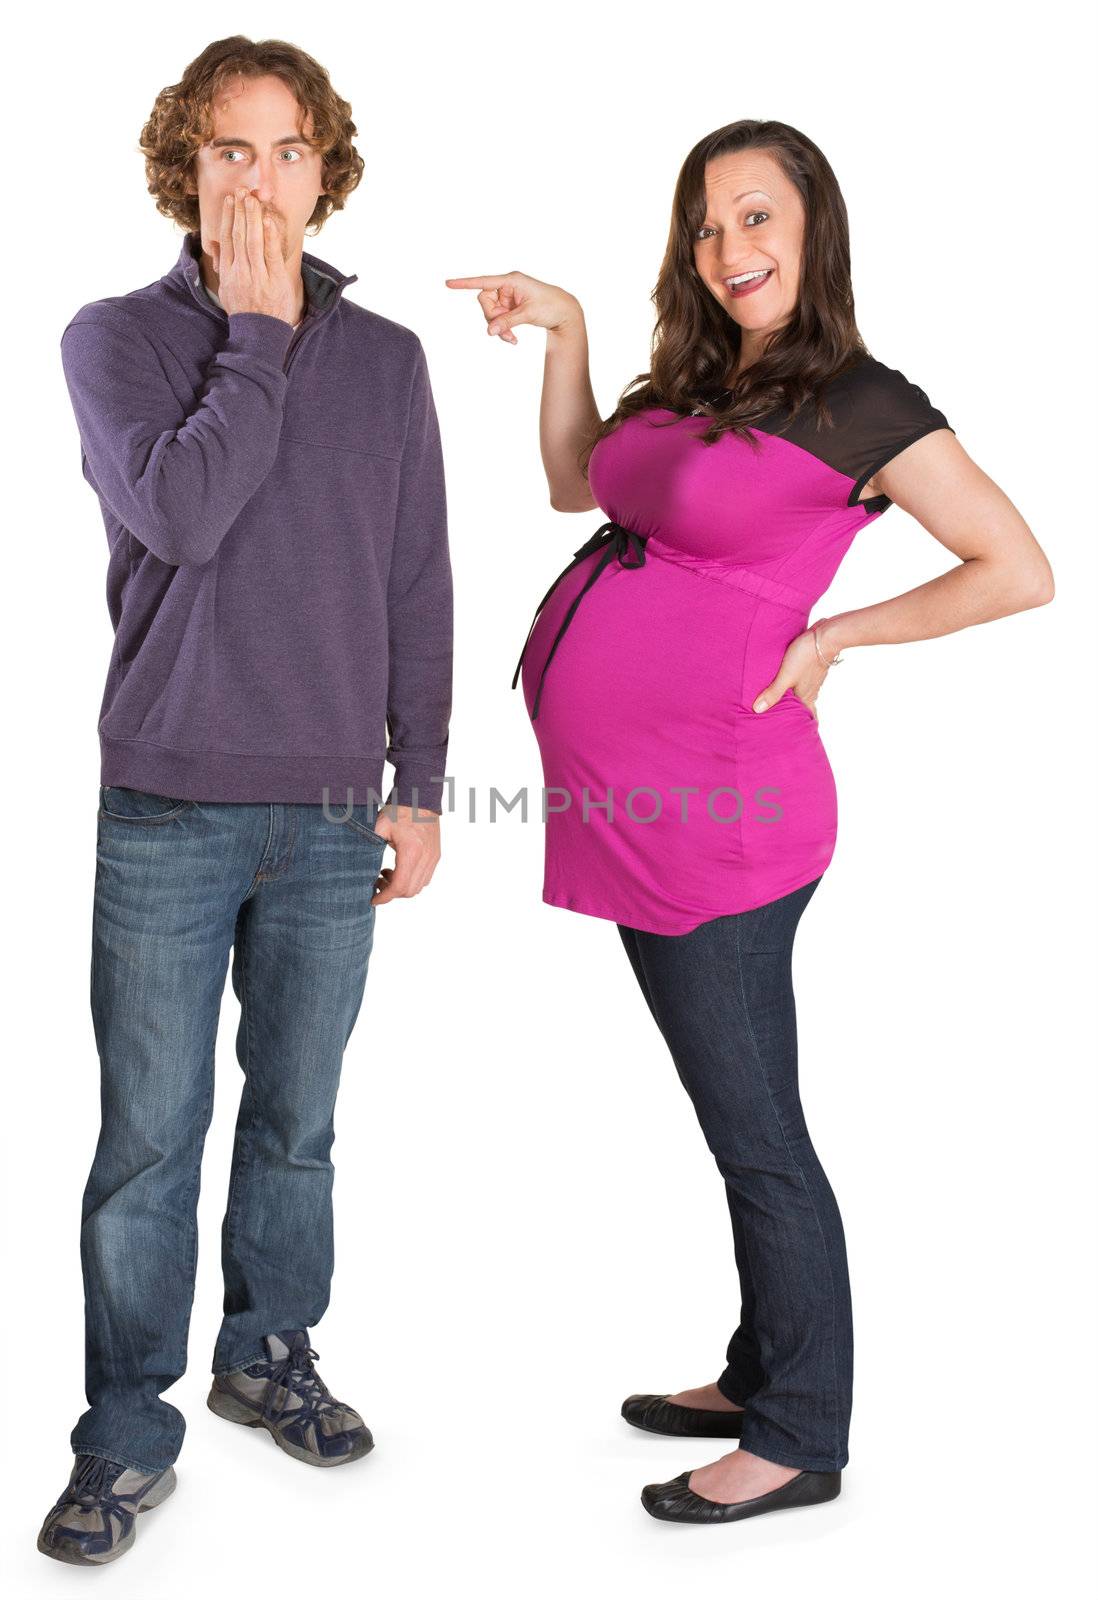 Man covering mouth as pregnant woman points at him